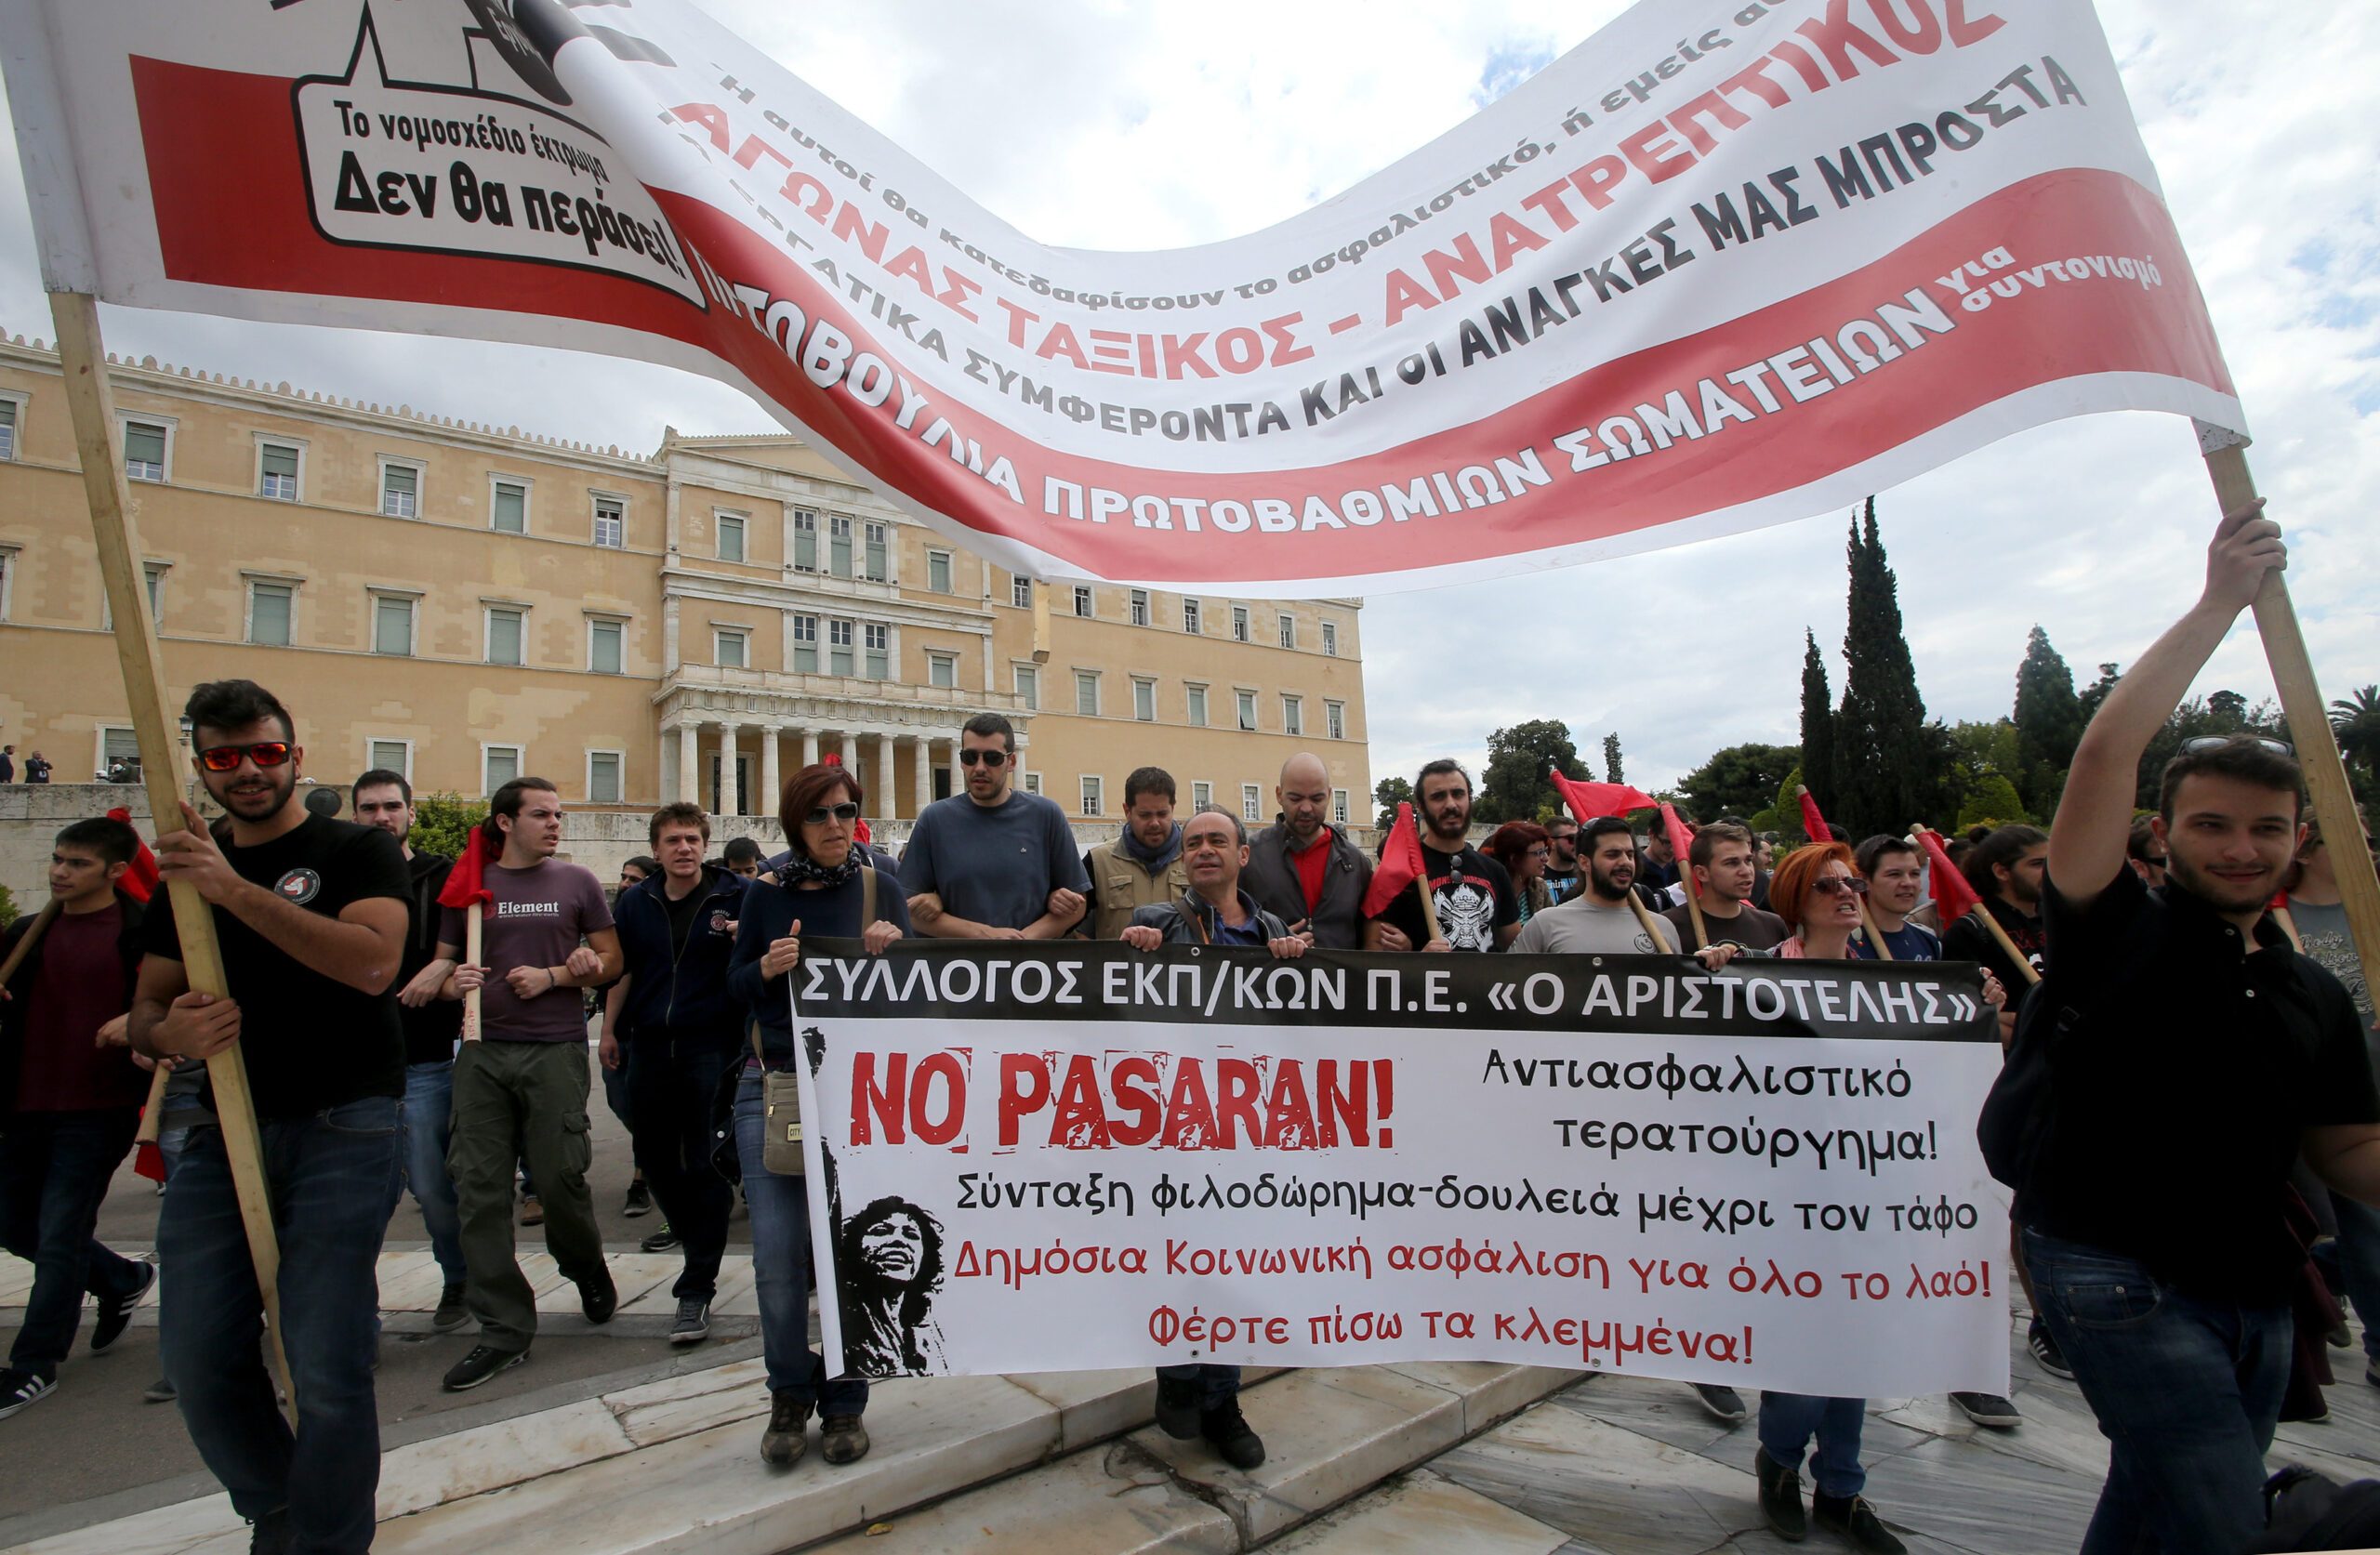 Greece paralyzed by strike over pension reforms and tax hikes